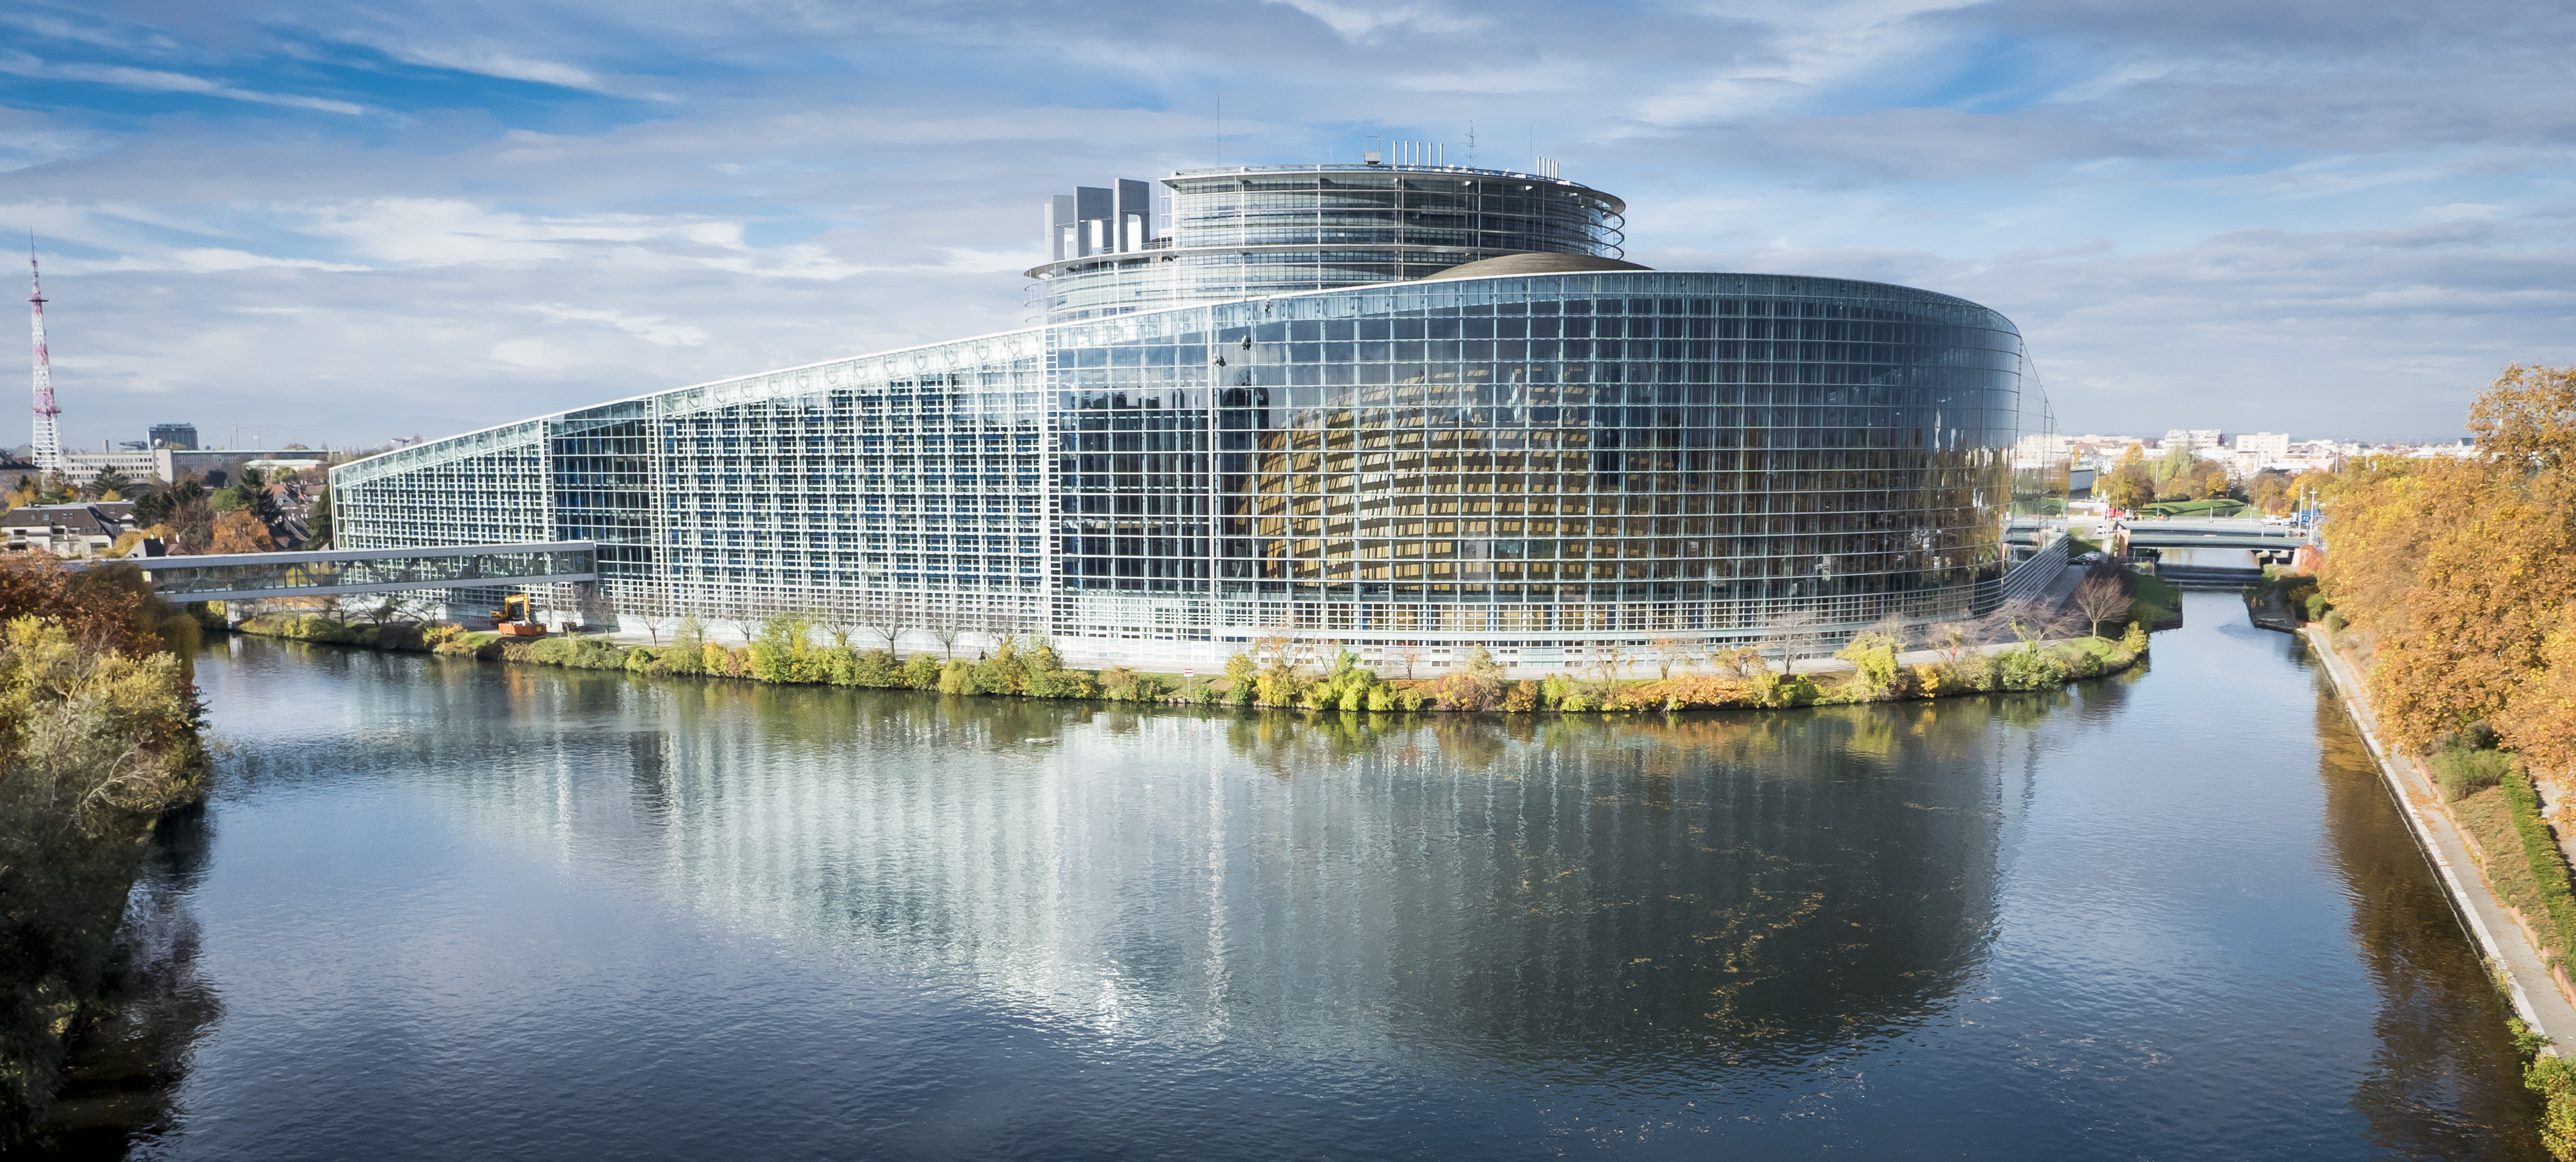 Join the 12th European Congress Open Day in Strasbourg!